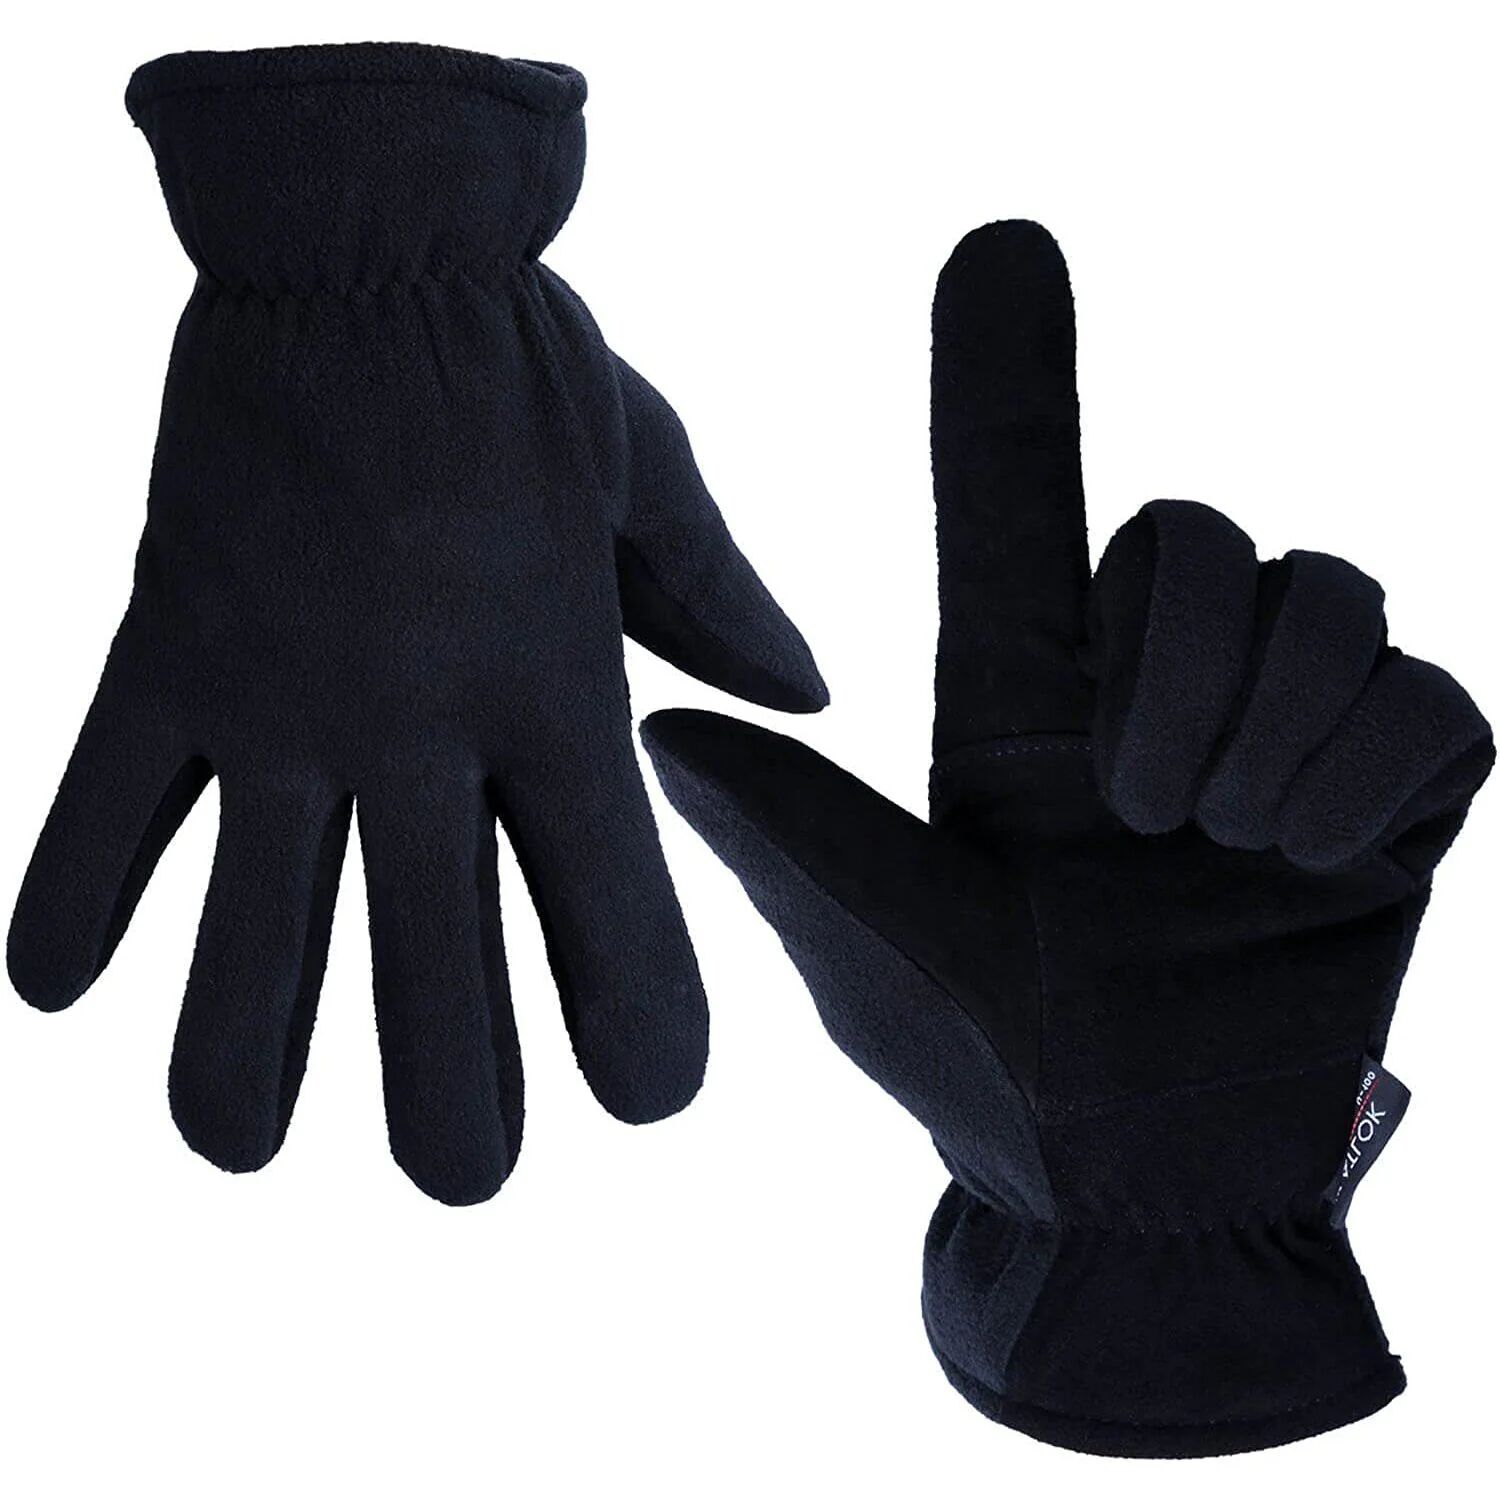 DailySale Winter Gloves Deerskin Suede Leather Palm -20F Cold Proof Work Glove